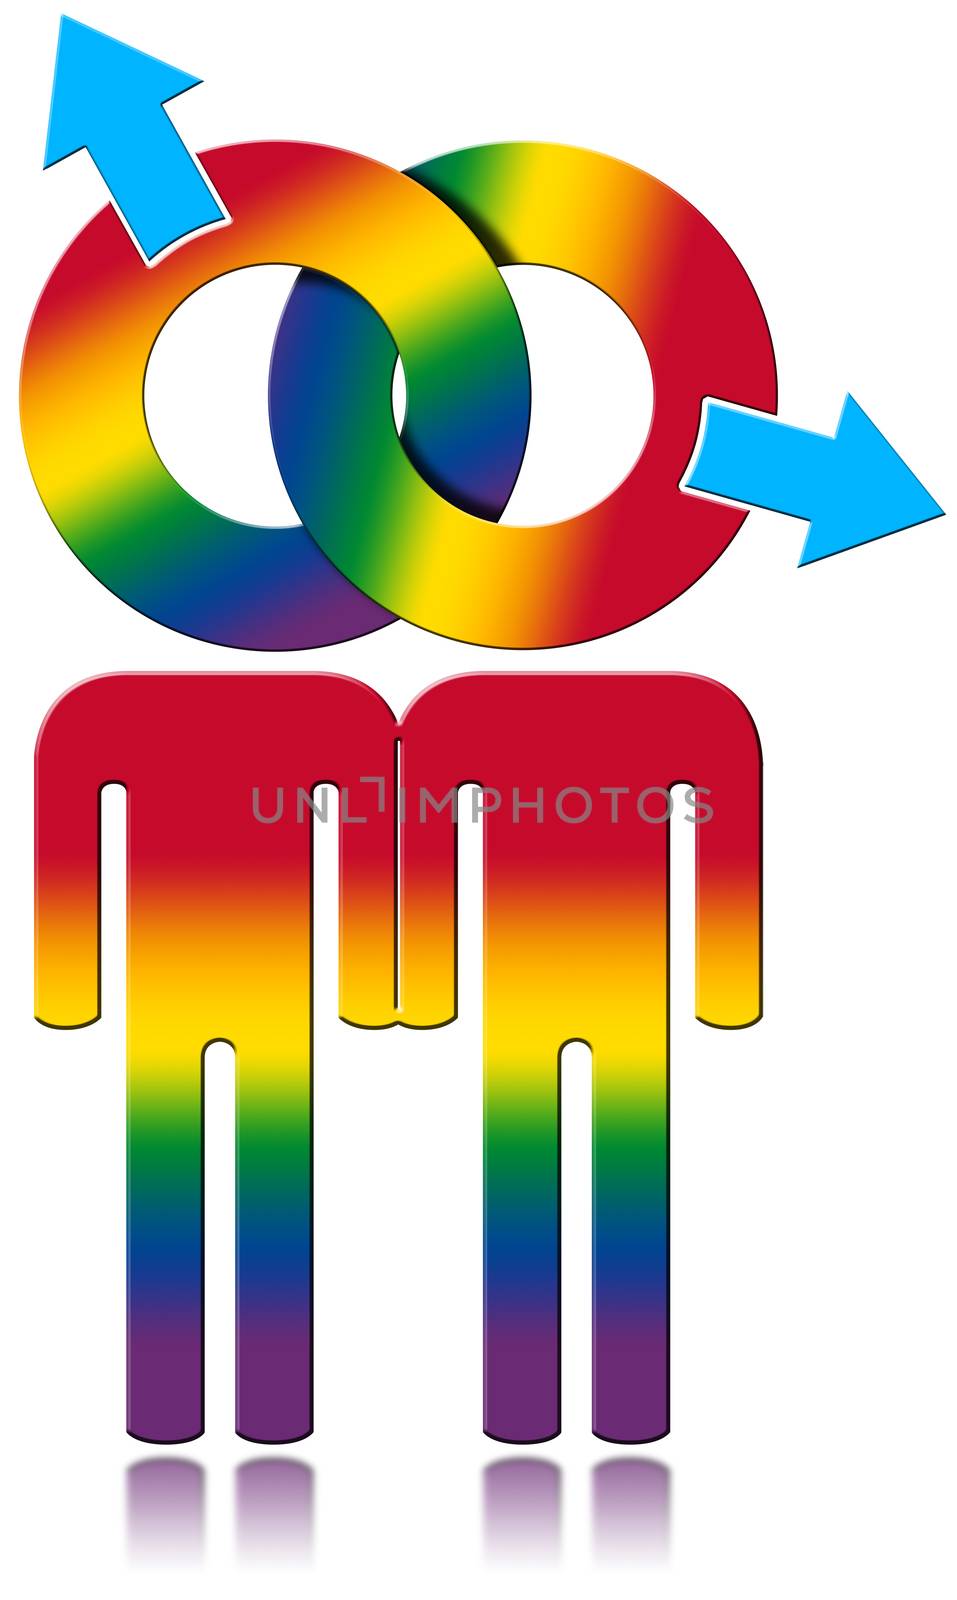 Gay symbol with the colors of the rainbow - gay relationship concept. Isolated on white background